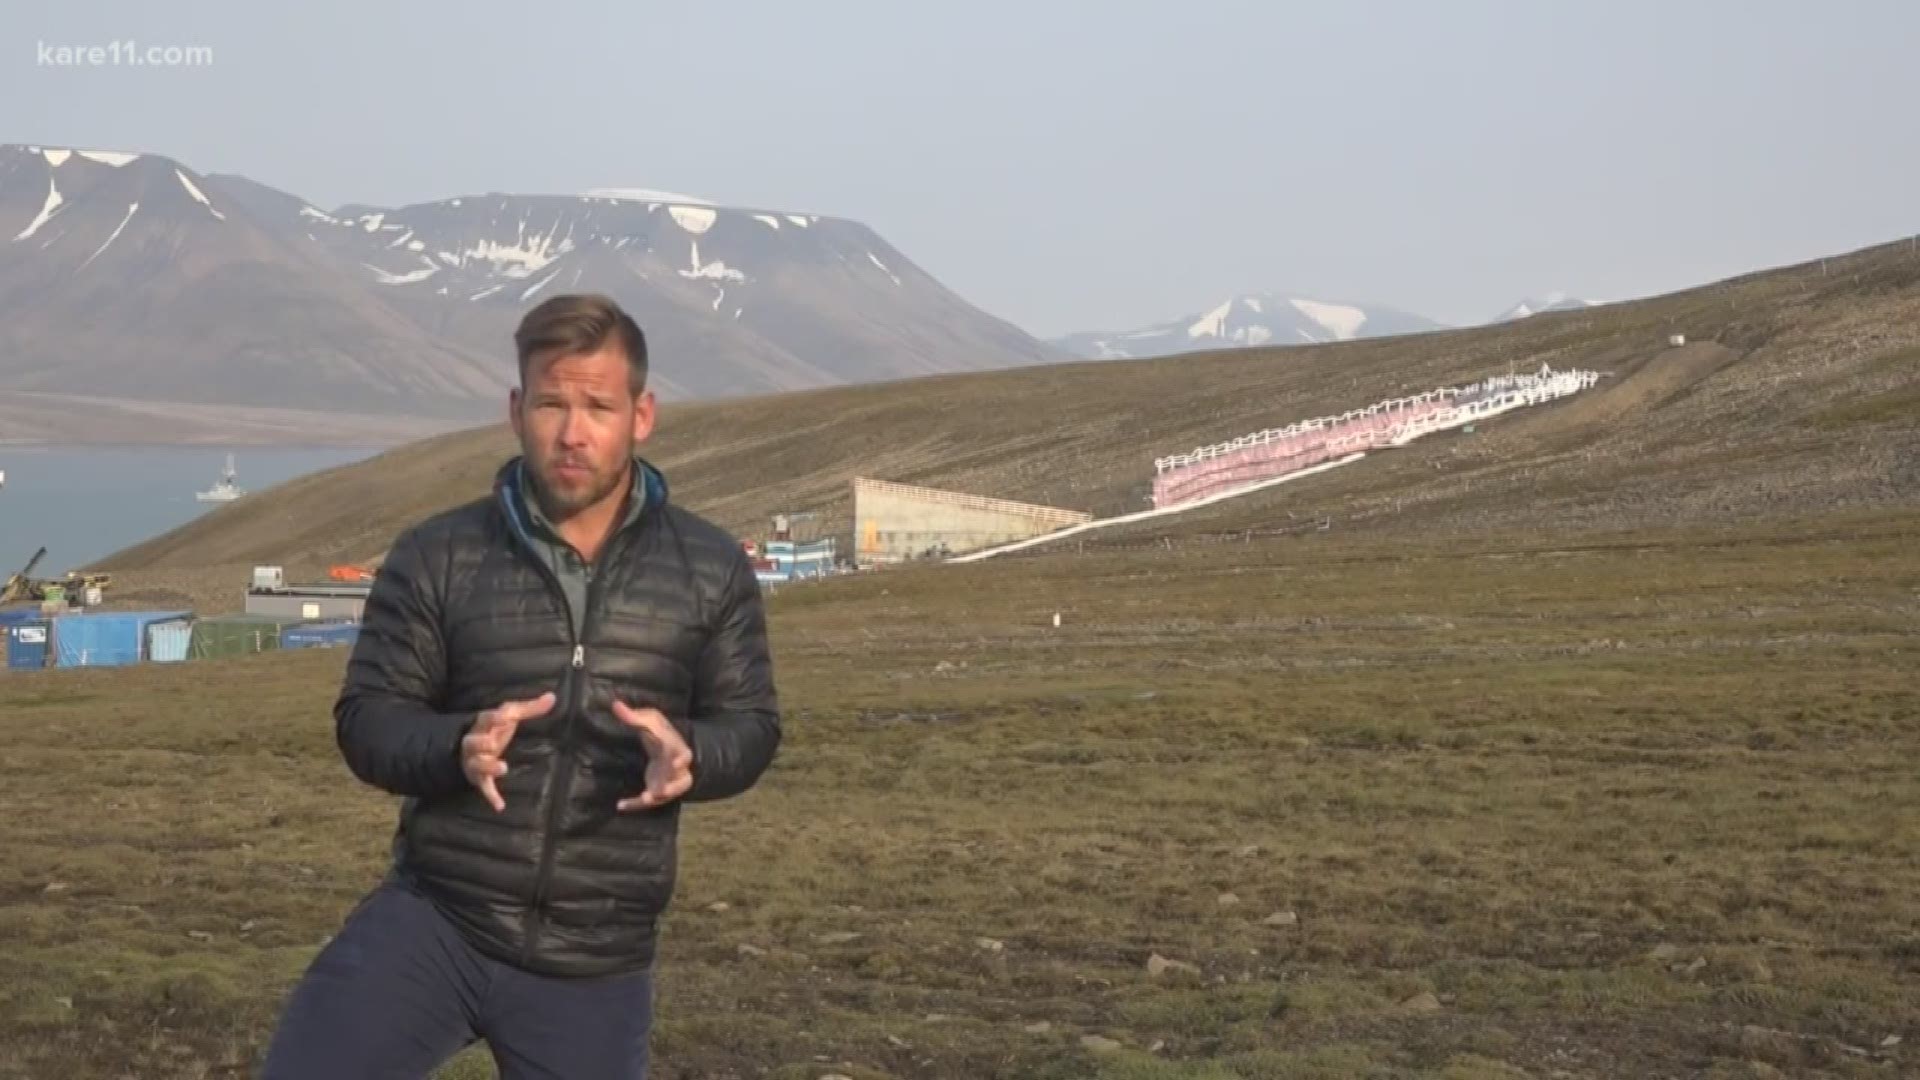 Sven continued his Arctic journey at the infamous Global Seed Vault in Svalbard. https://kare11.tv/2KTZZJx